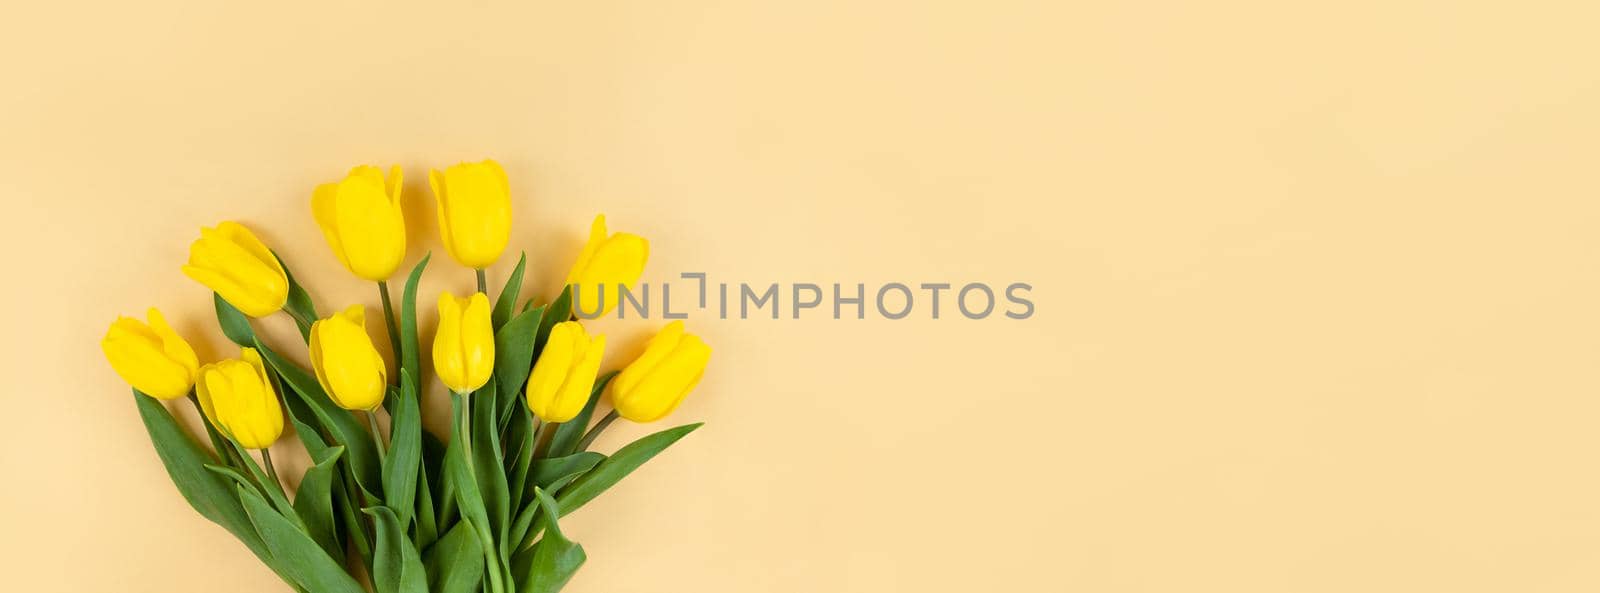 Bouquet of yellow tulips on a beige background with copy space.